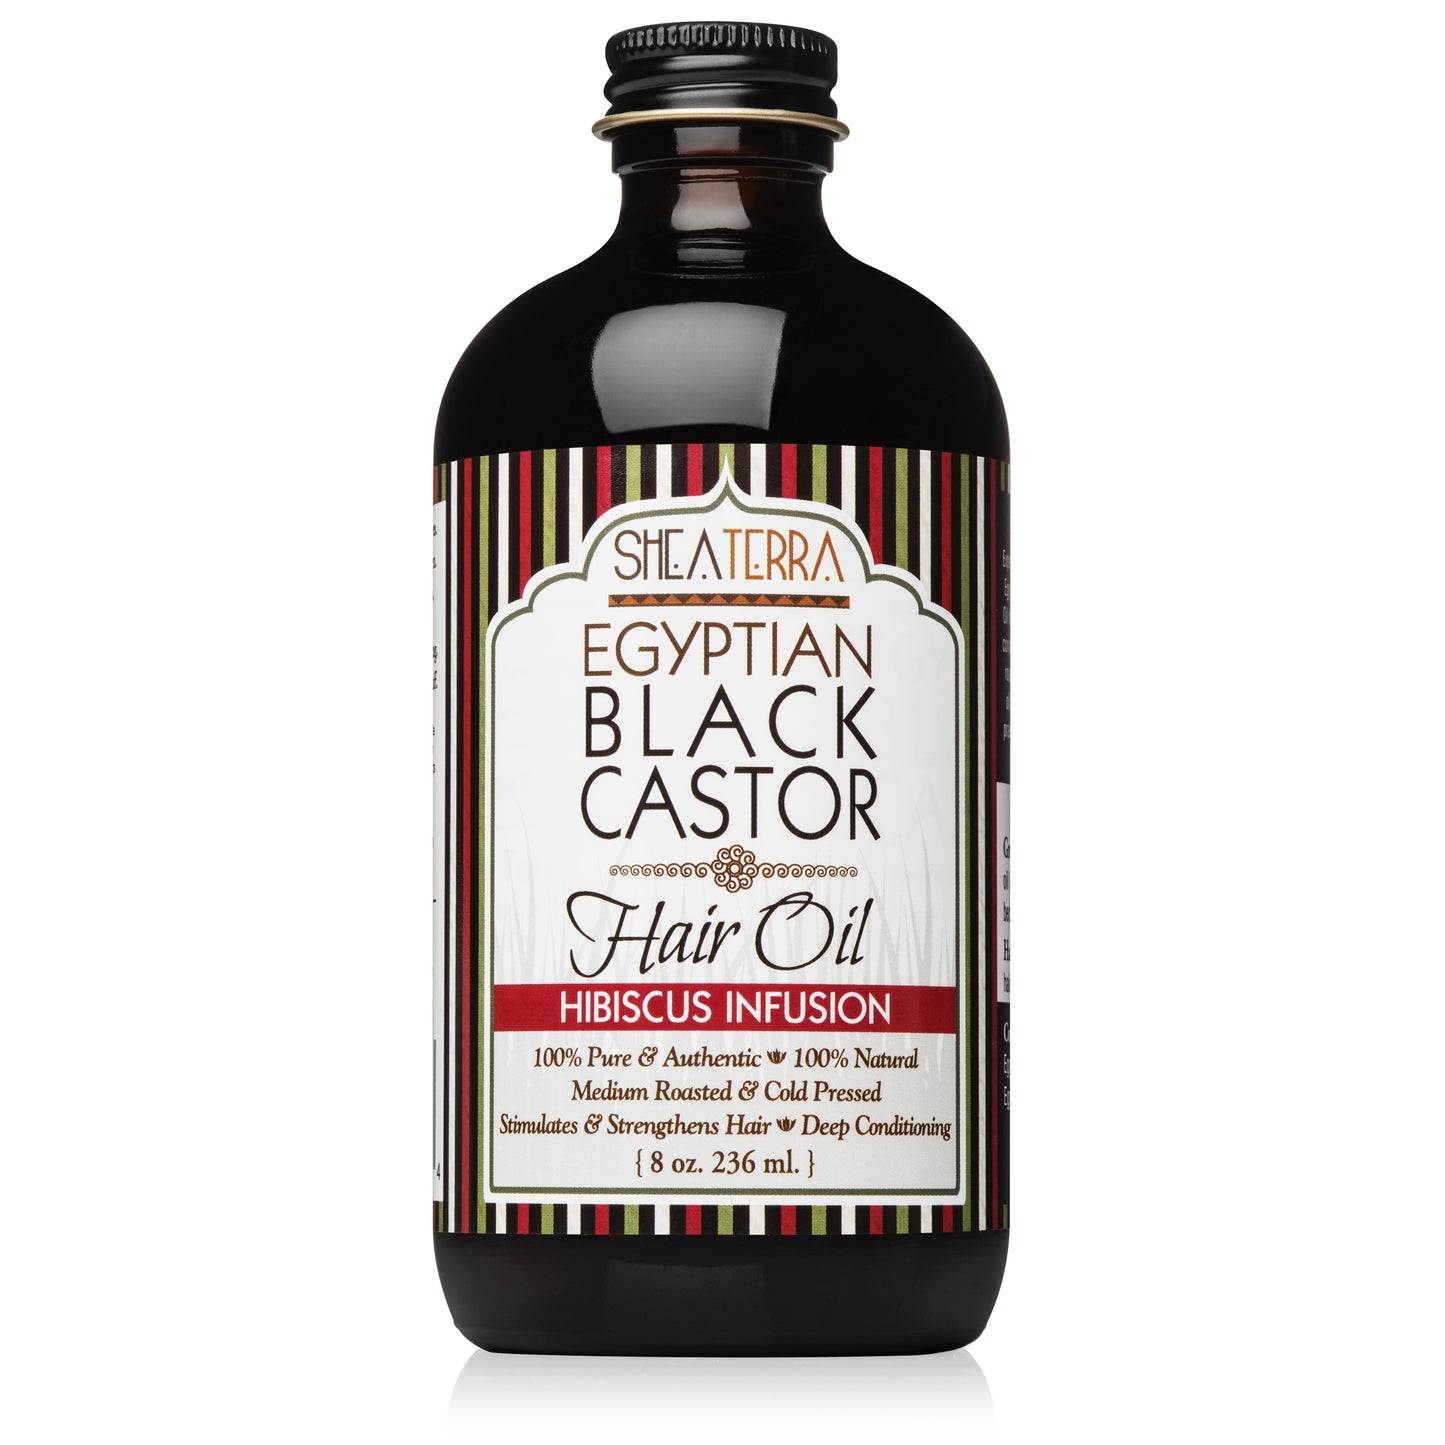 100% Pure Egyptian Black Castor Oil HIBISCUS INFUSION